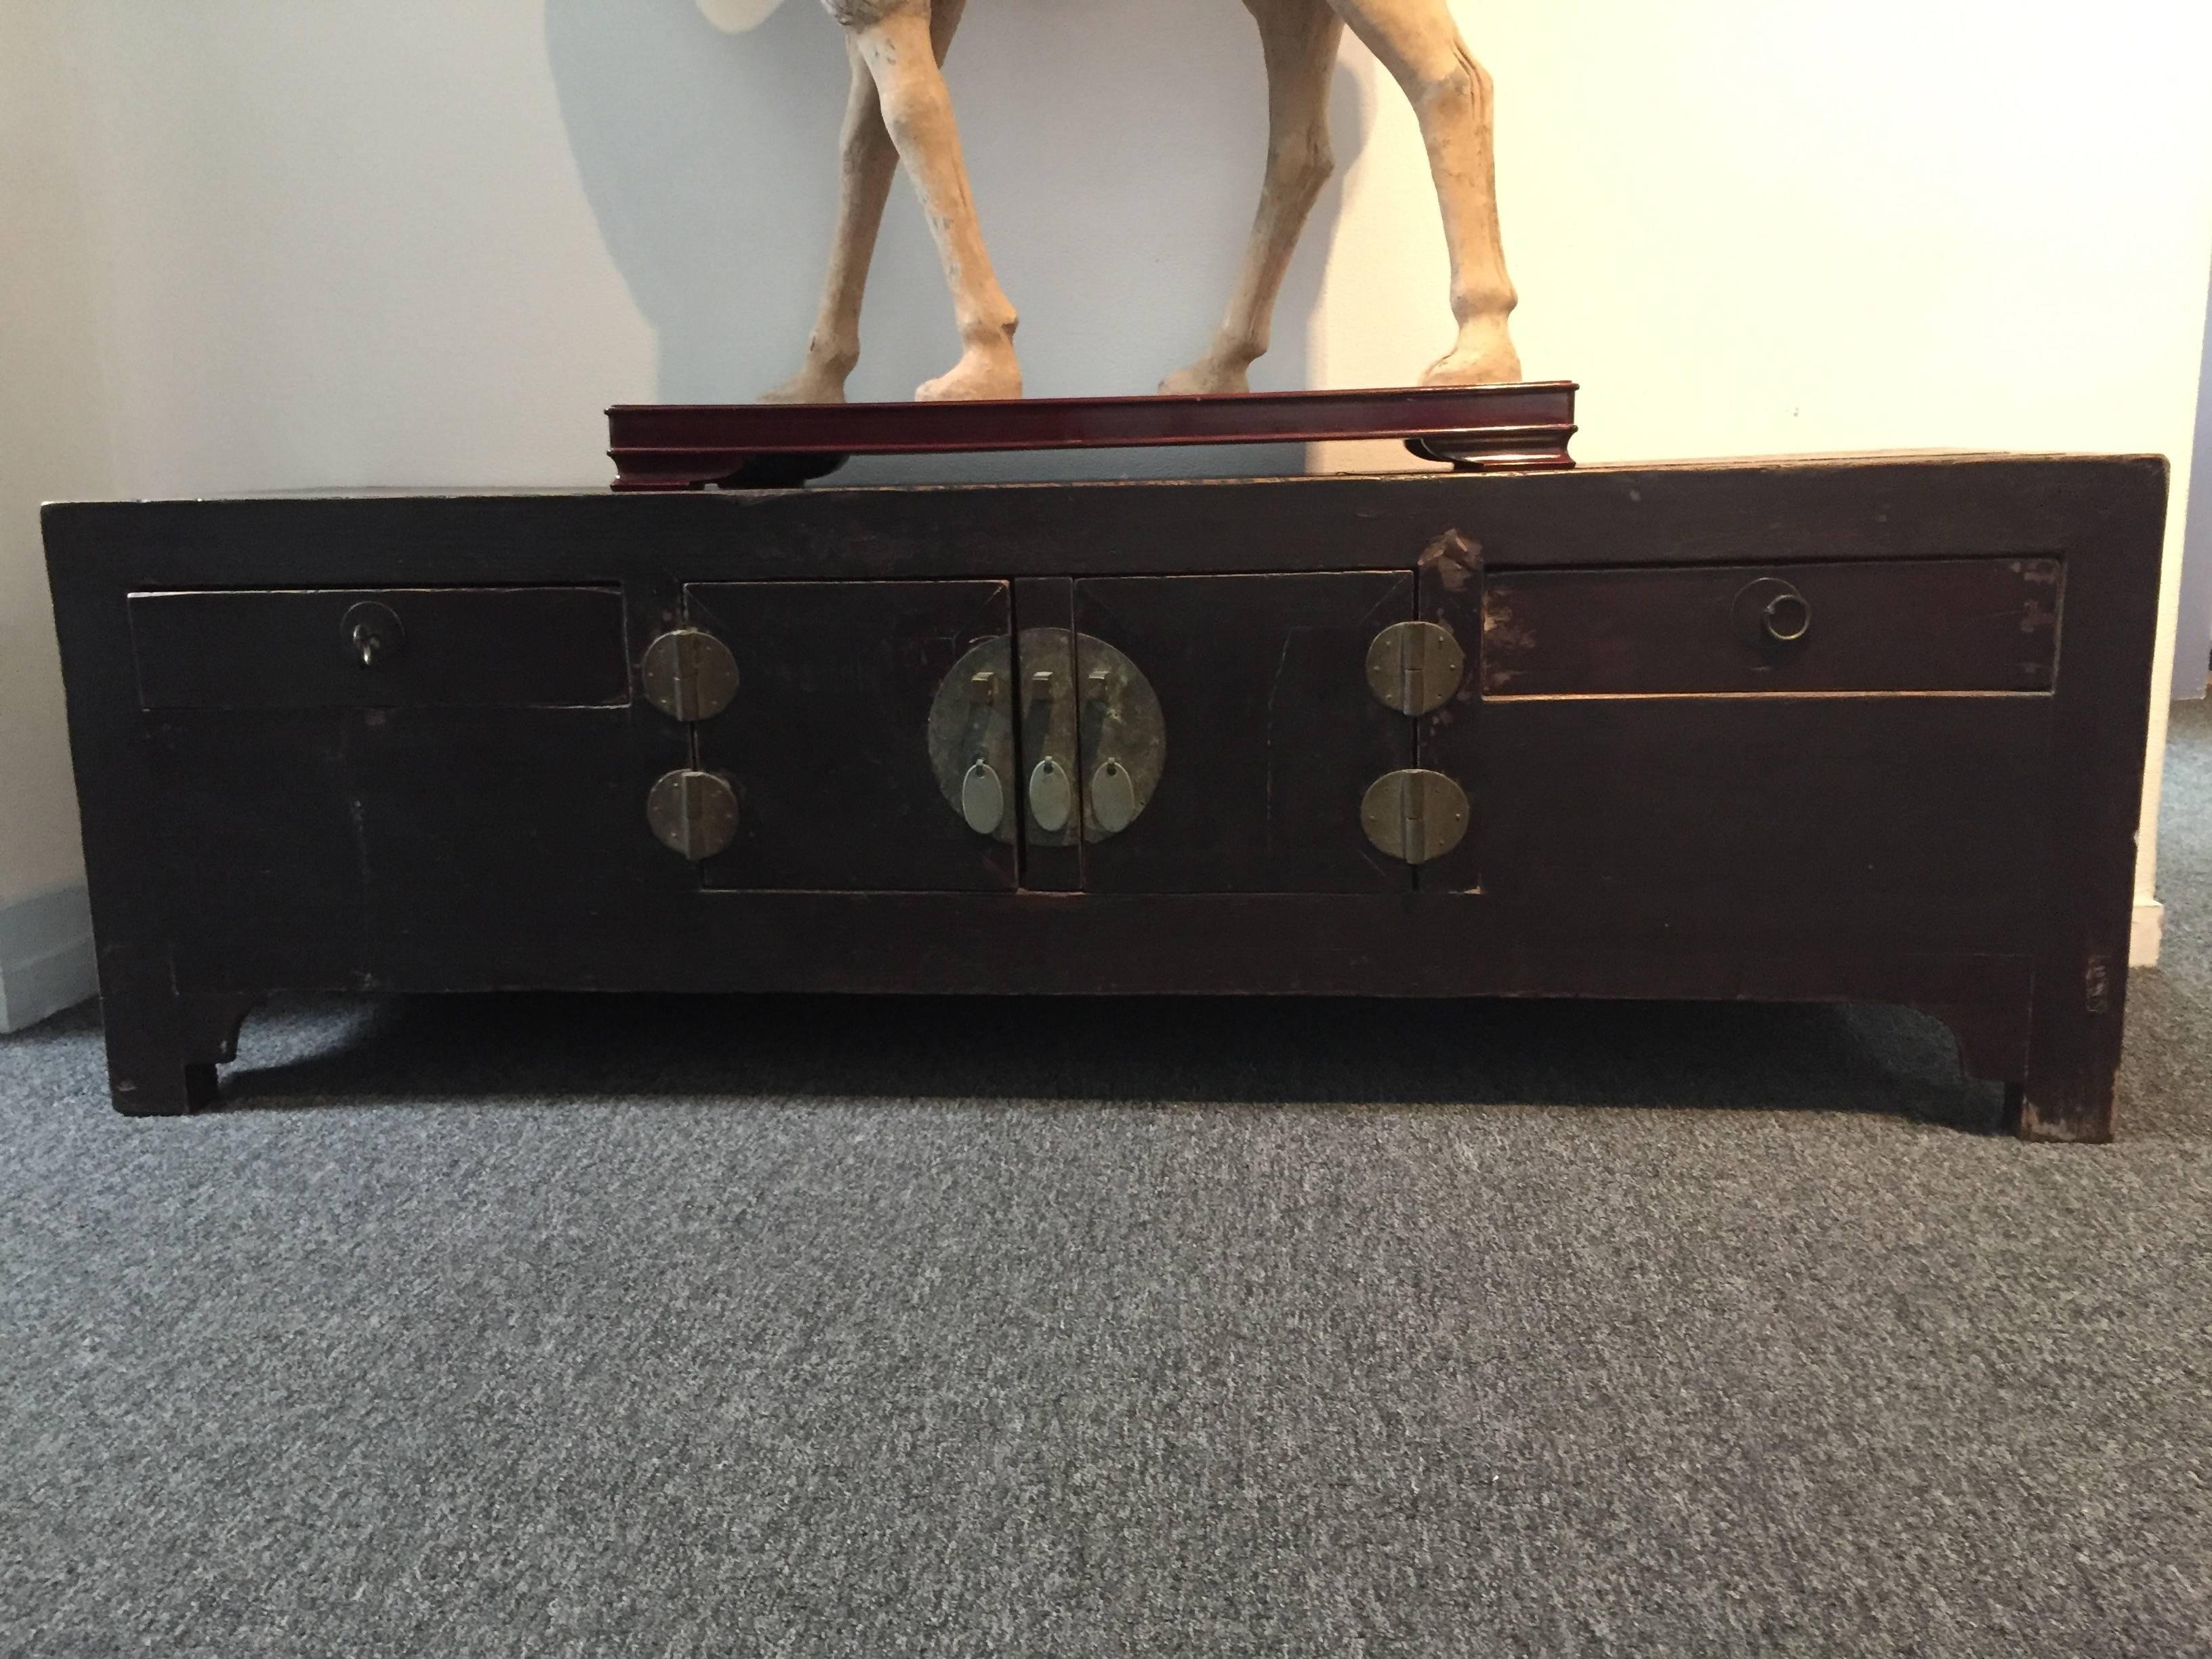 Late 19th or early 20th century low standing alter table.
With two sliding doors and two center doors that open out.
Original hardware.
Good for storage and display purposes.
*item is on sale, and will expire at end of Aug.
Offered by J R